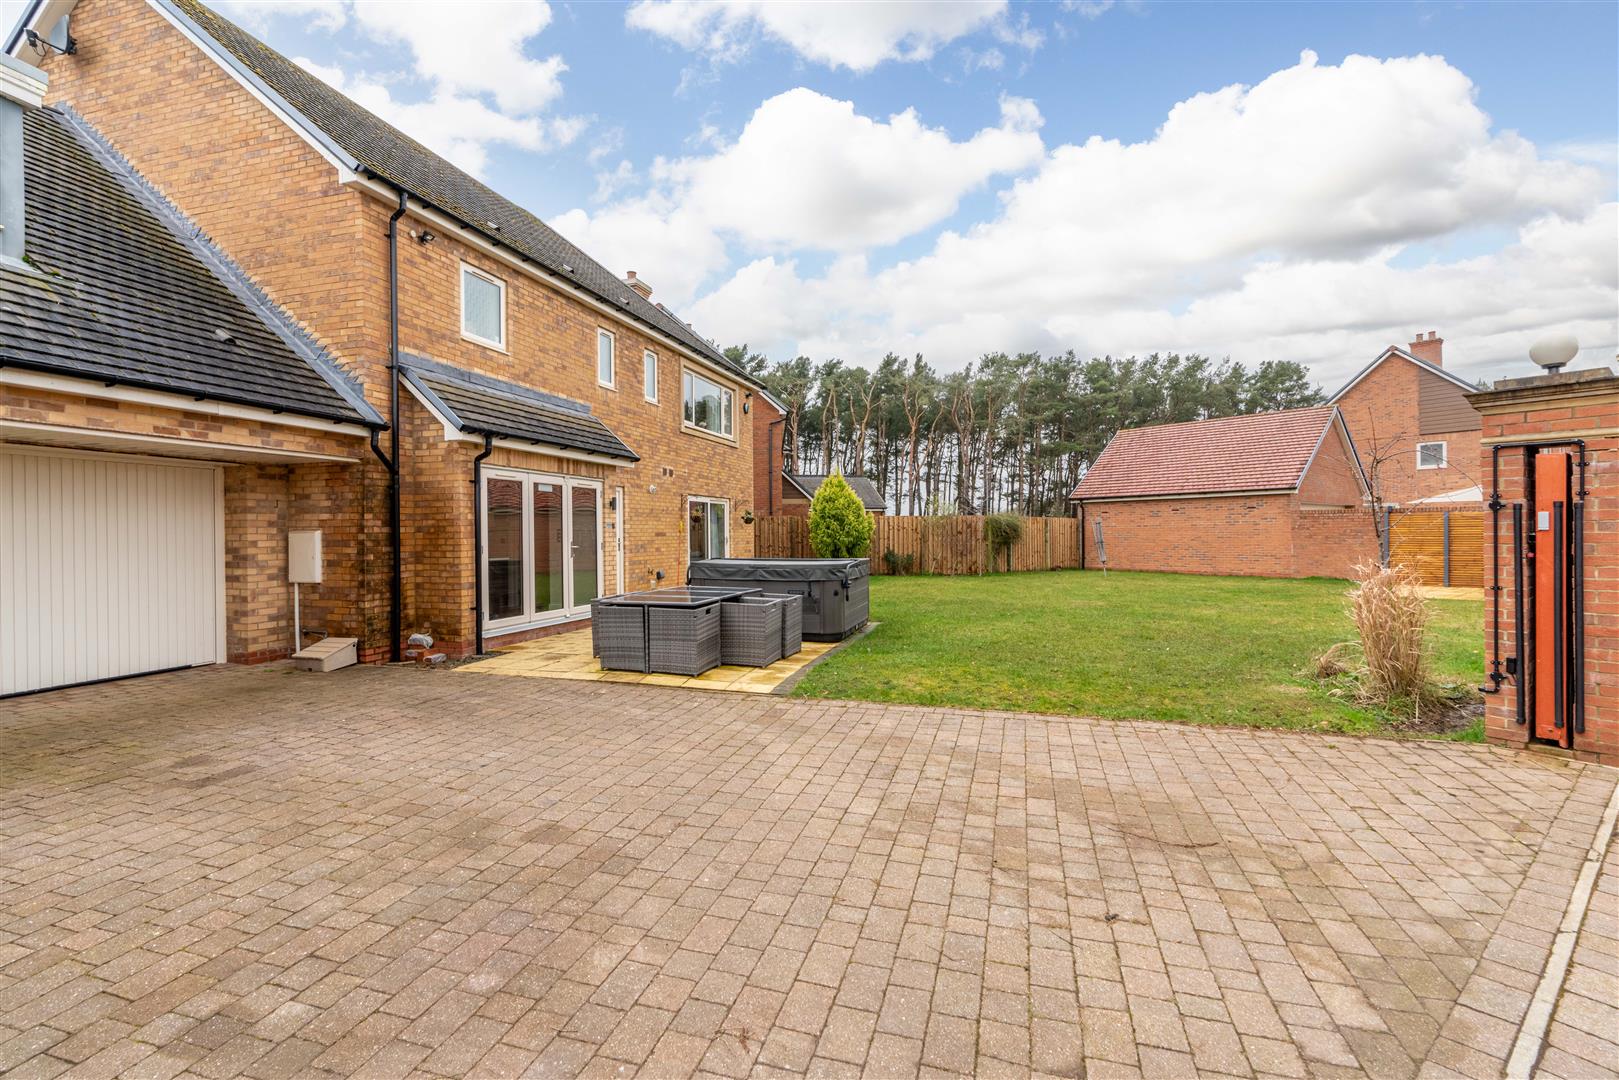 5 bed detached house for sale in Beamish Way, Morpeth  - Property Image 9